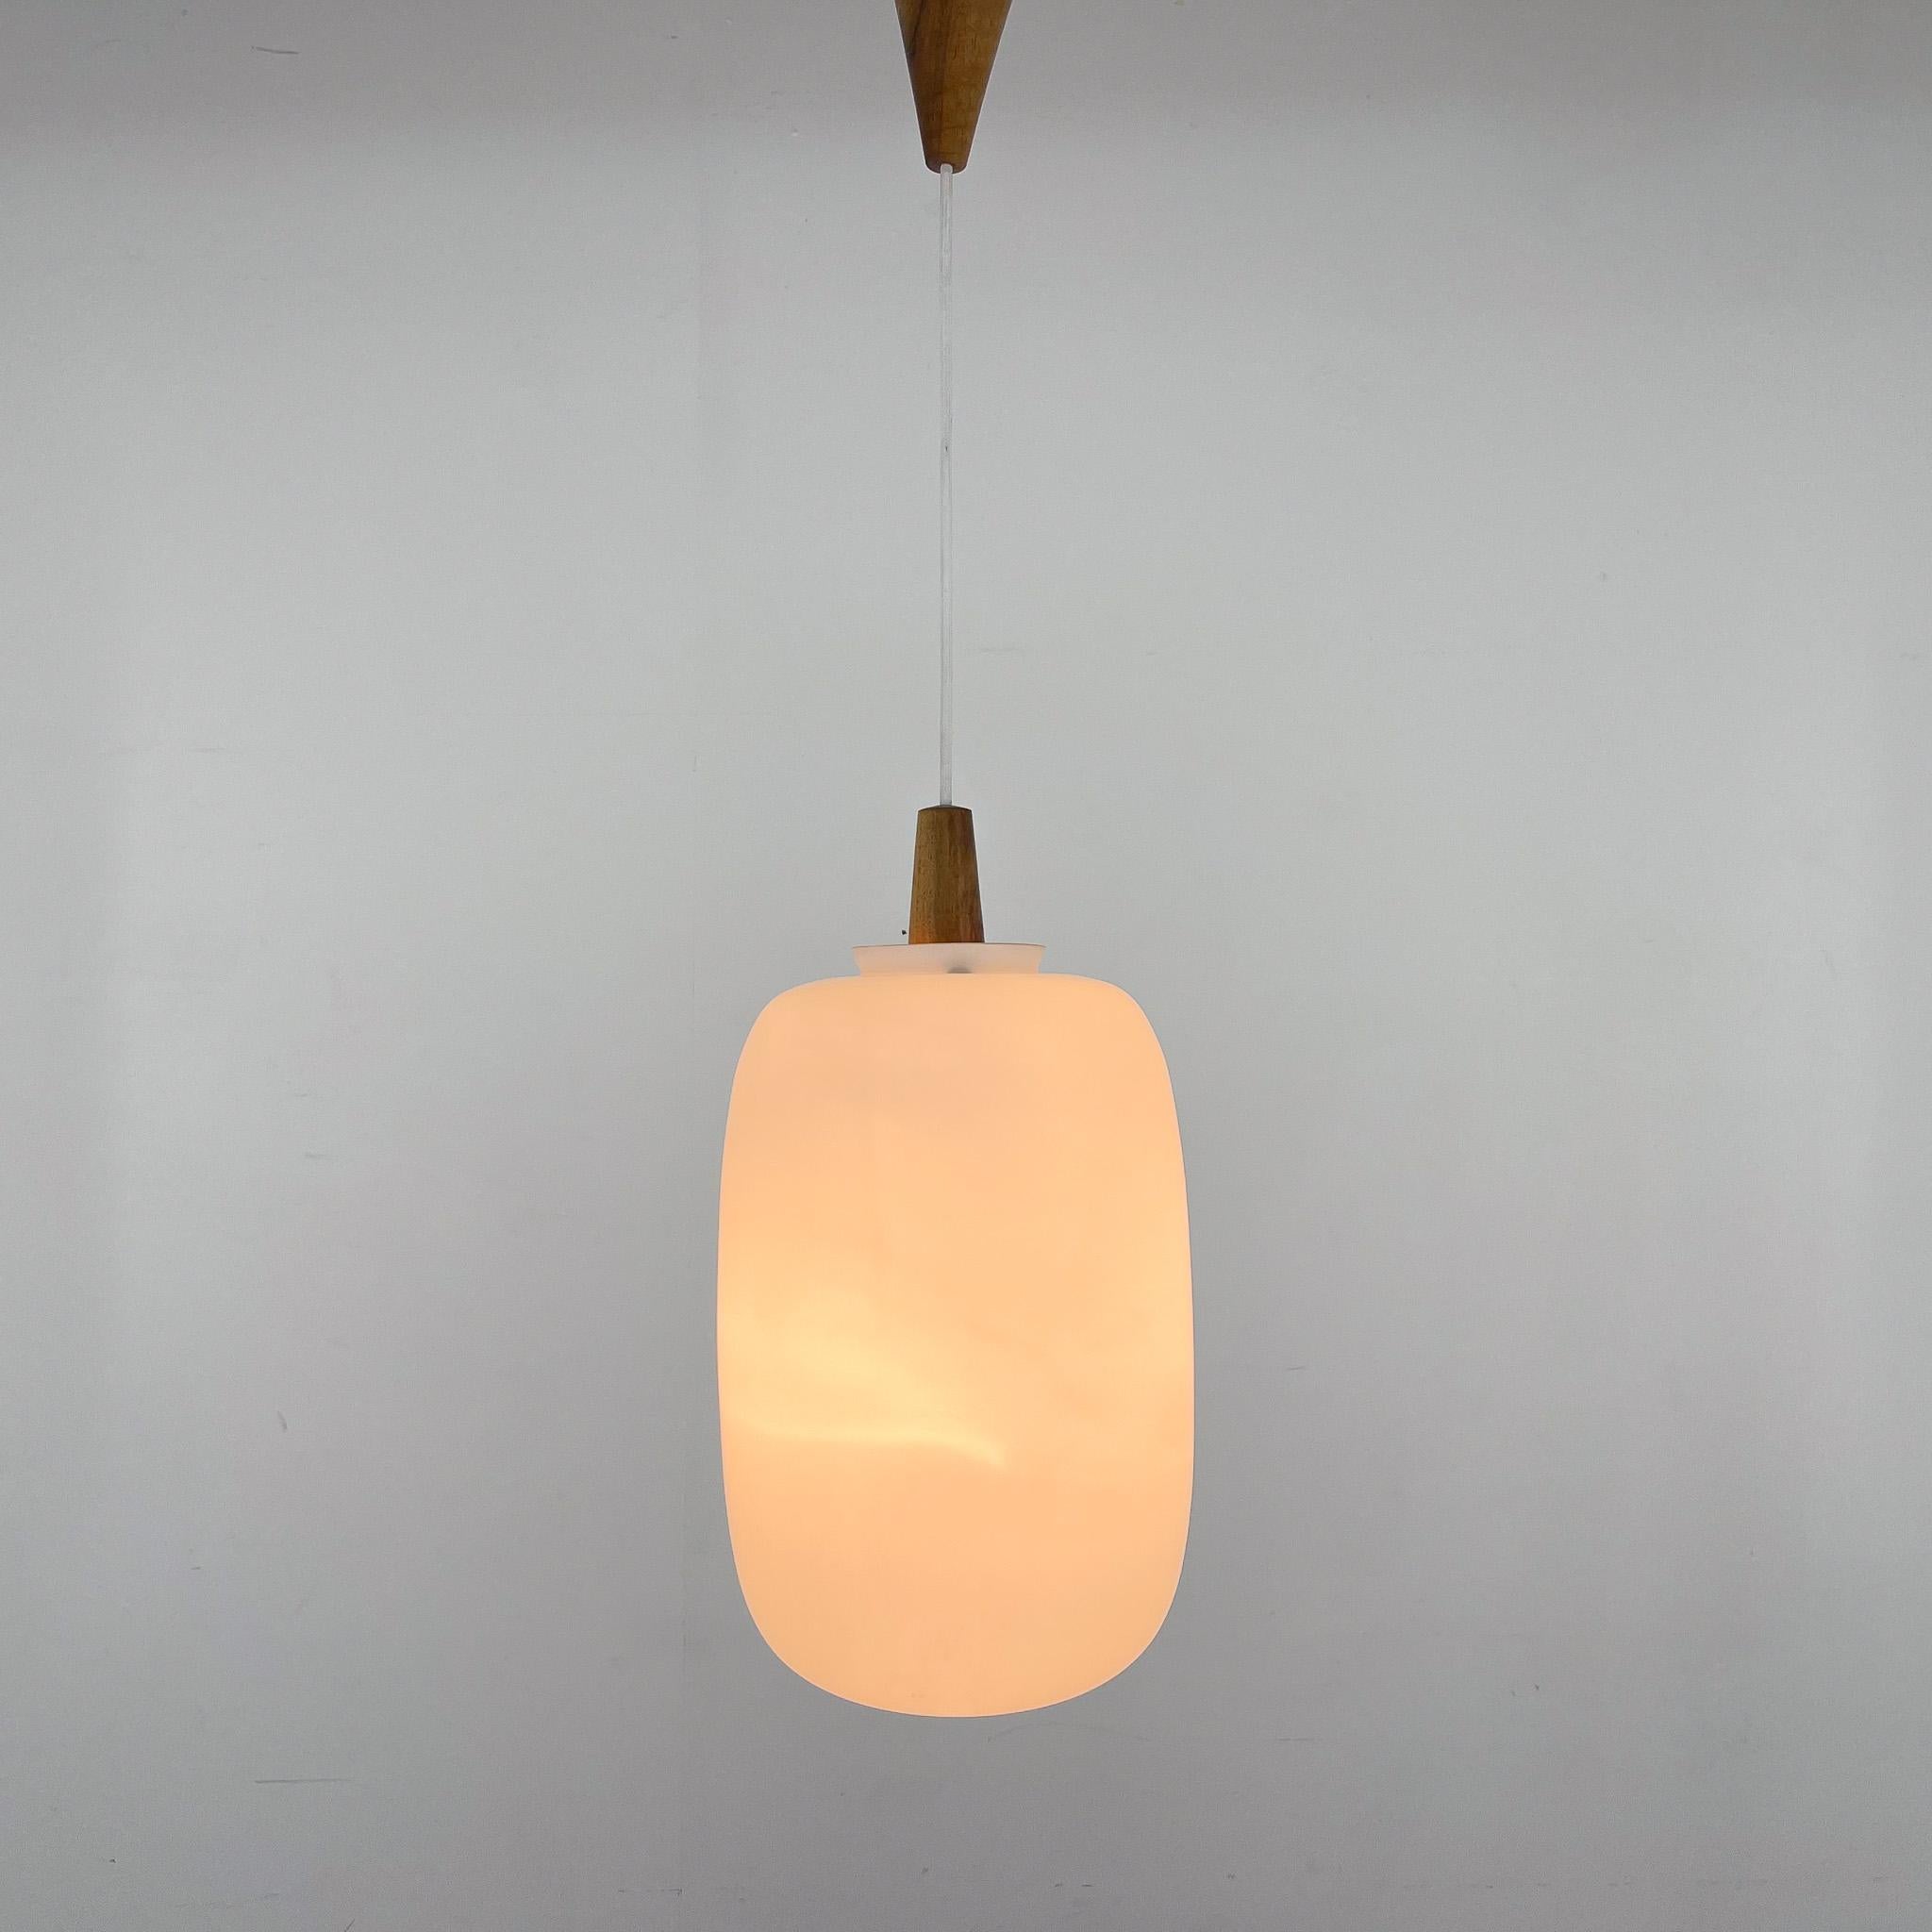 Elegant midcentury pendant light by ULUV made from wood and milk glass. Produced in former Czechoslovakia in the 1960s. 
Good vintage condition. 1x  E25-E27 sockets. US wiring compatible. 